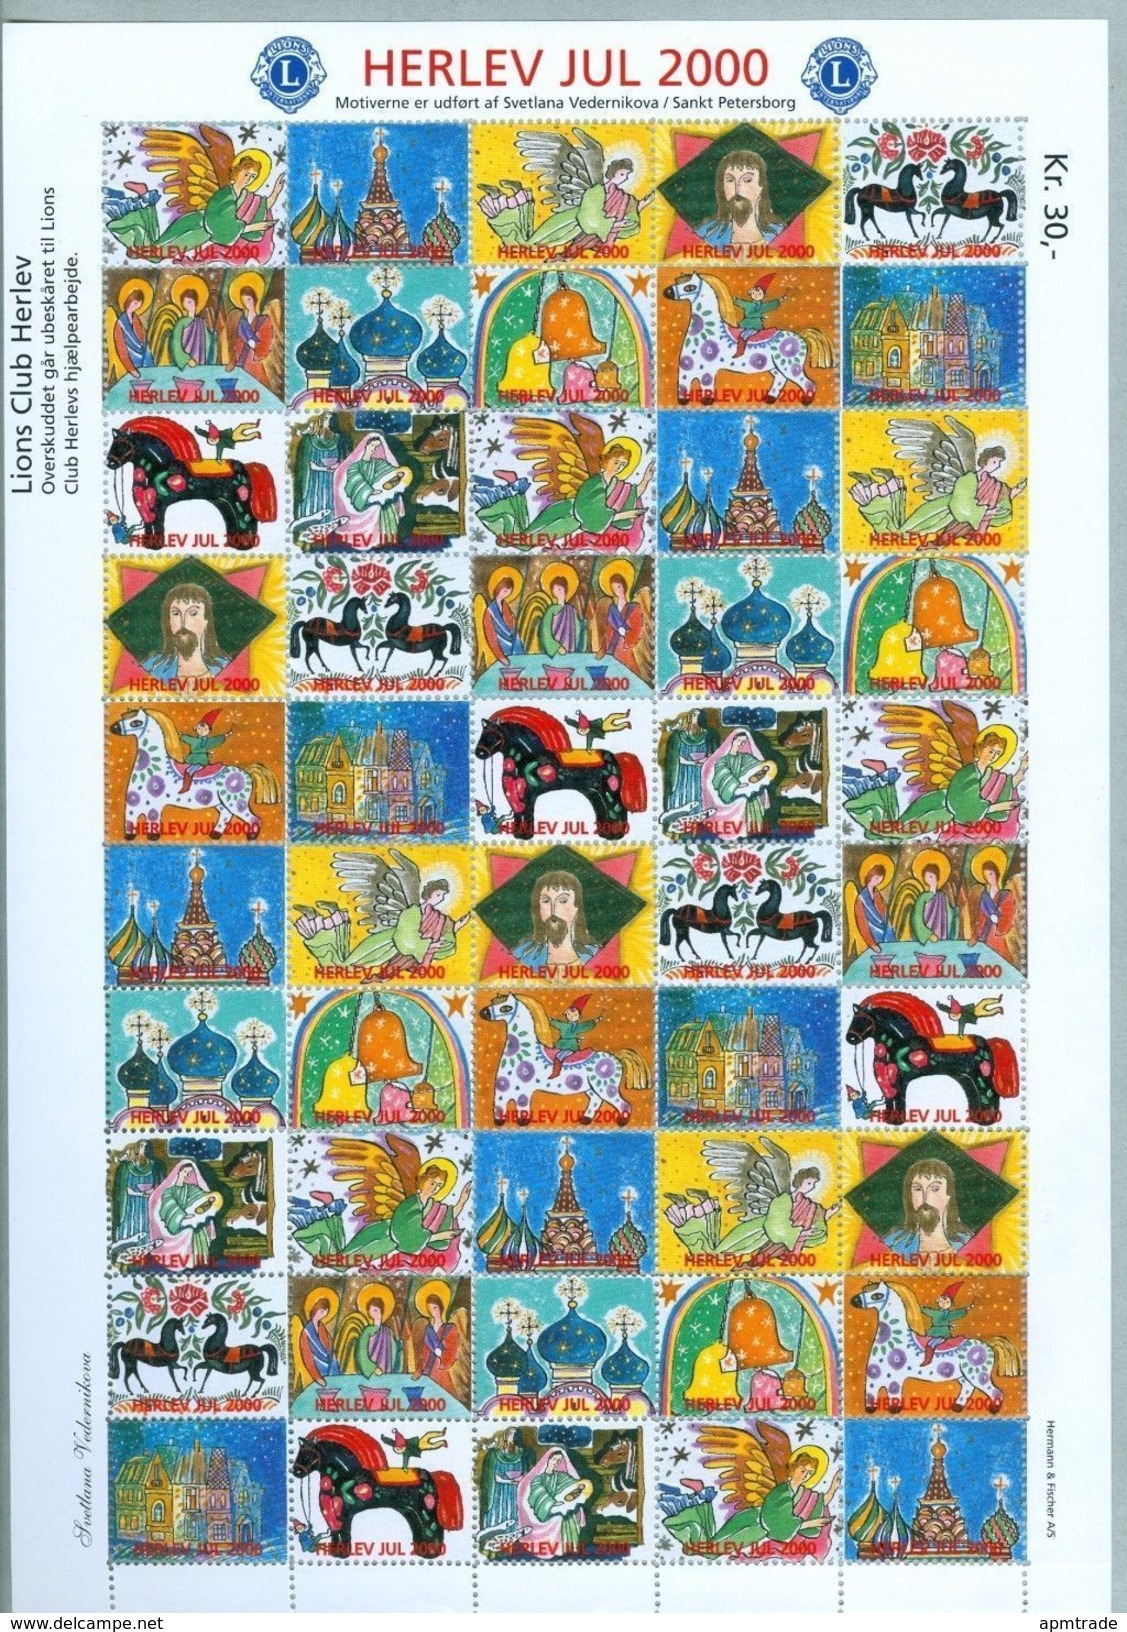 Denmark. Christmas Sheet Mnh 2000. Lions Club. Local Herlev. Christmas In Russia - Feuilles Complètes Et Multiples